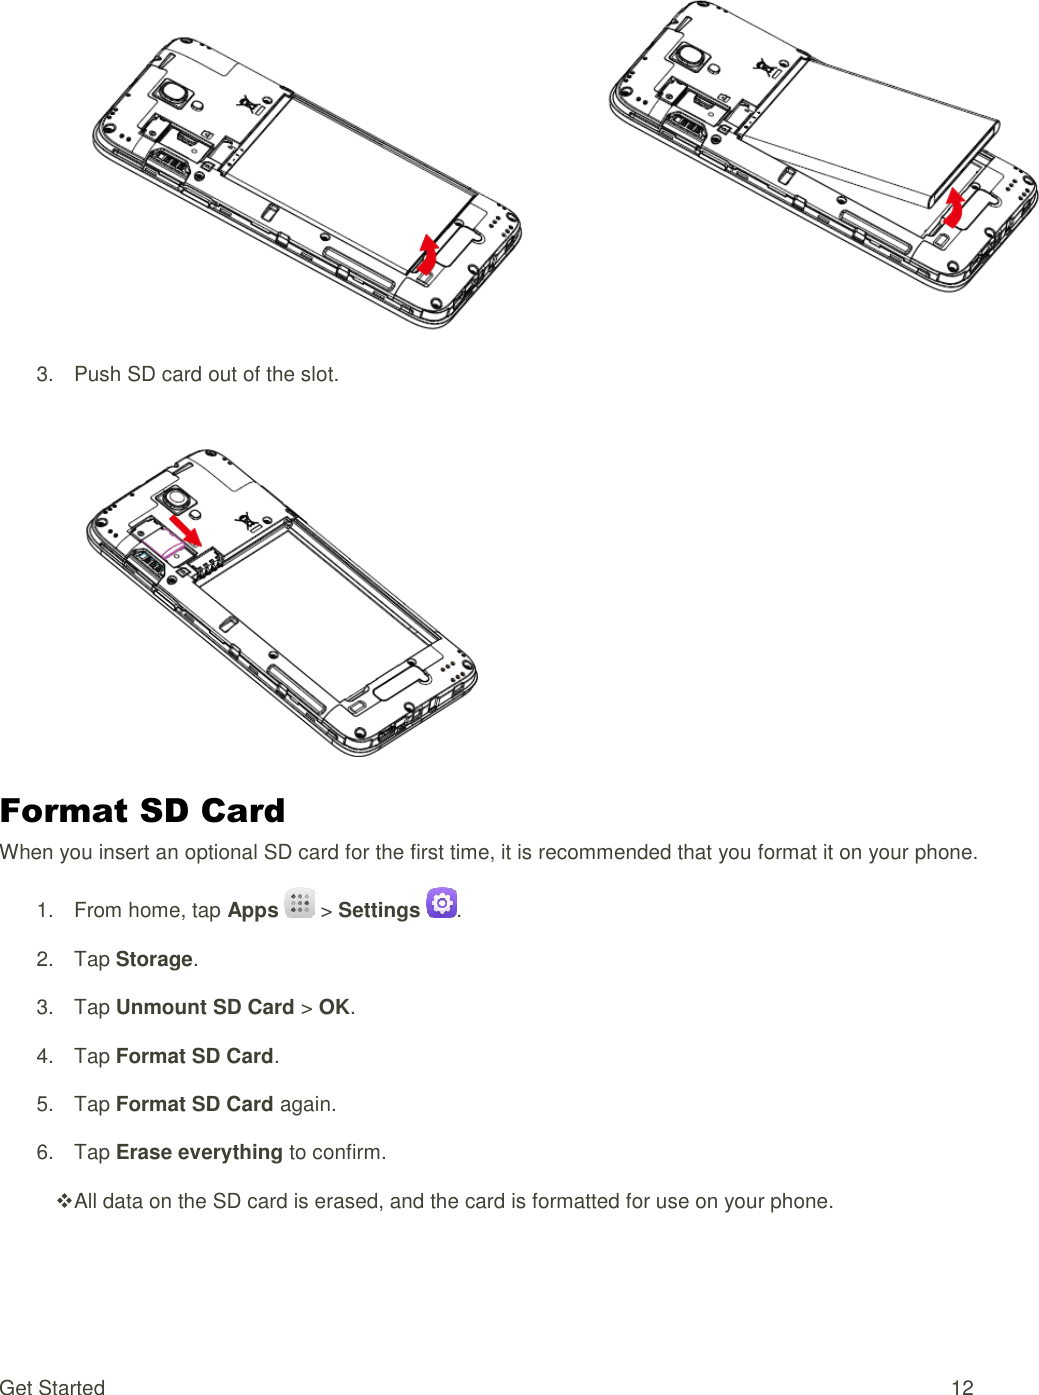 Get Started  12  3.  Push SD card out of the slot.   Format SD Card When you insert an optional SD card for the first time, it is recommended that you format it on your phone. 1.  From home, tap Apps  &gt; Settings  . 2.  Tap Storage. 3.  Tap Unmount SD Card &gt; OK.  4.  Tap Format SD Card. 5.  Tap Format SD Card again. 6.  Tap Erase everything to confirm.  All data on the SD card is erased, and the card is formatted for use on your phone. 